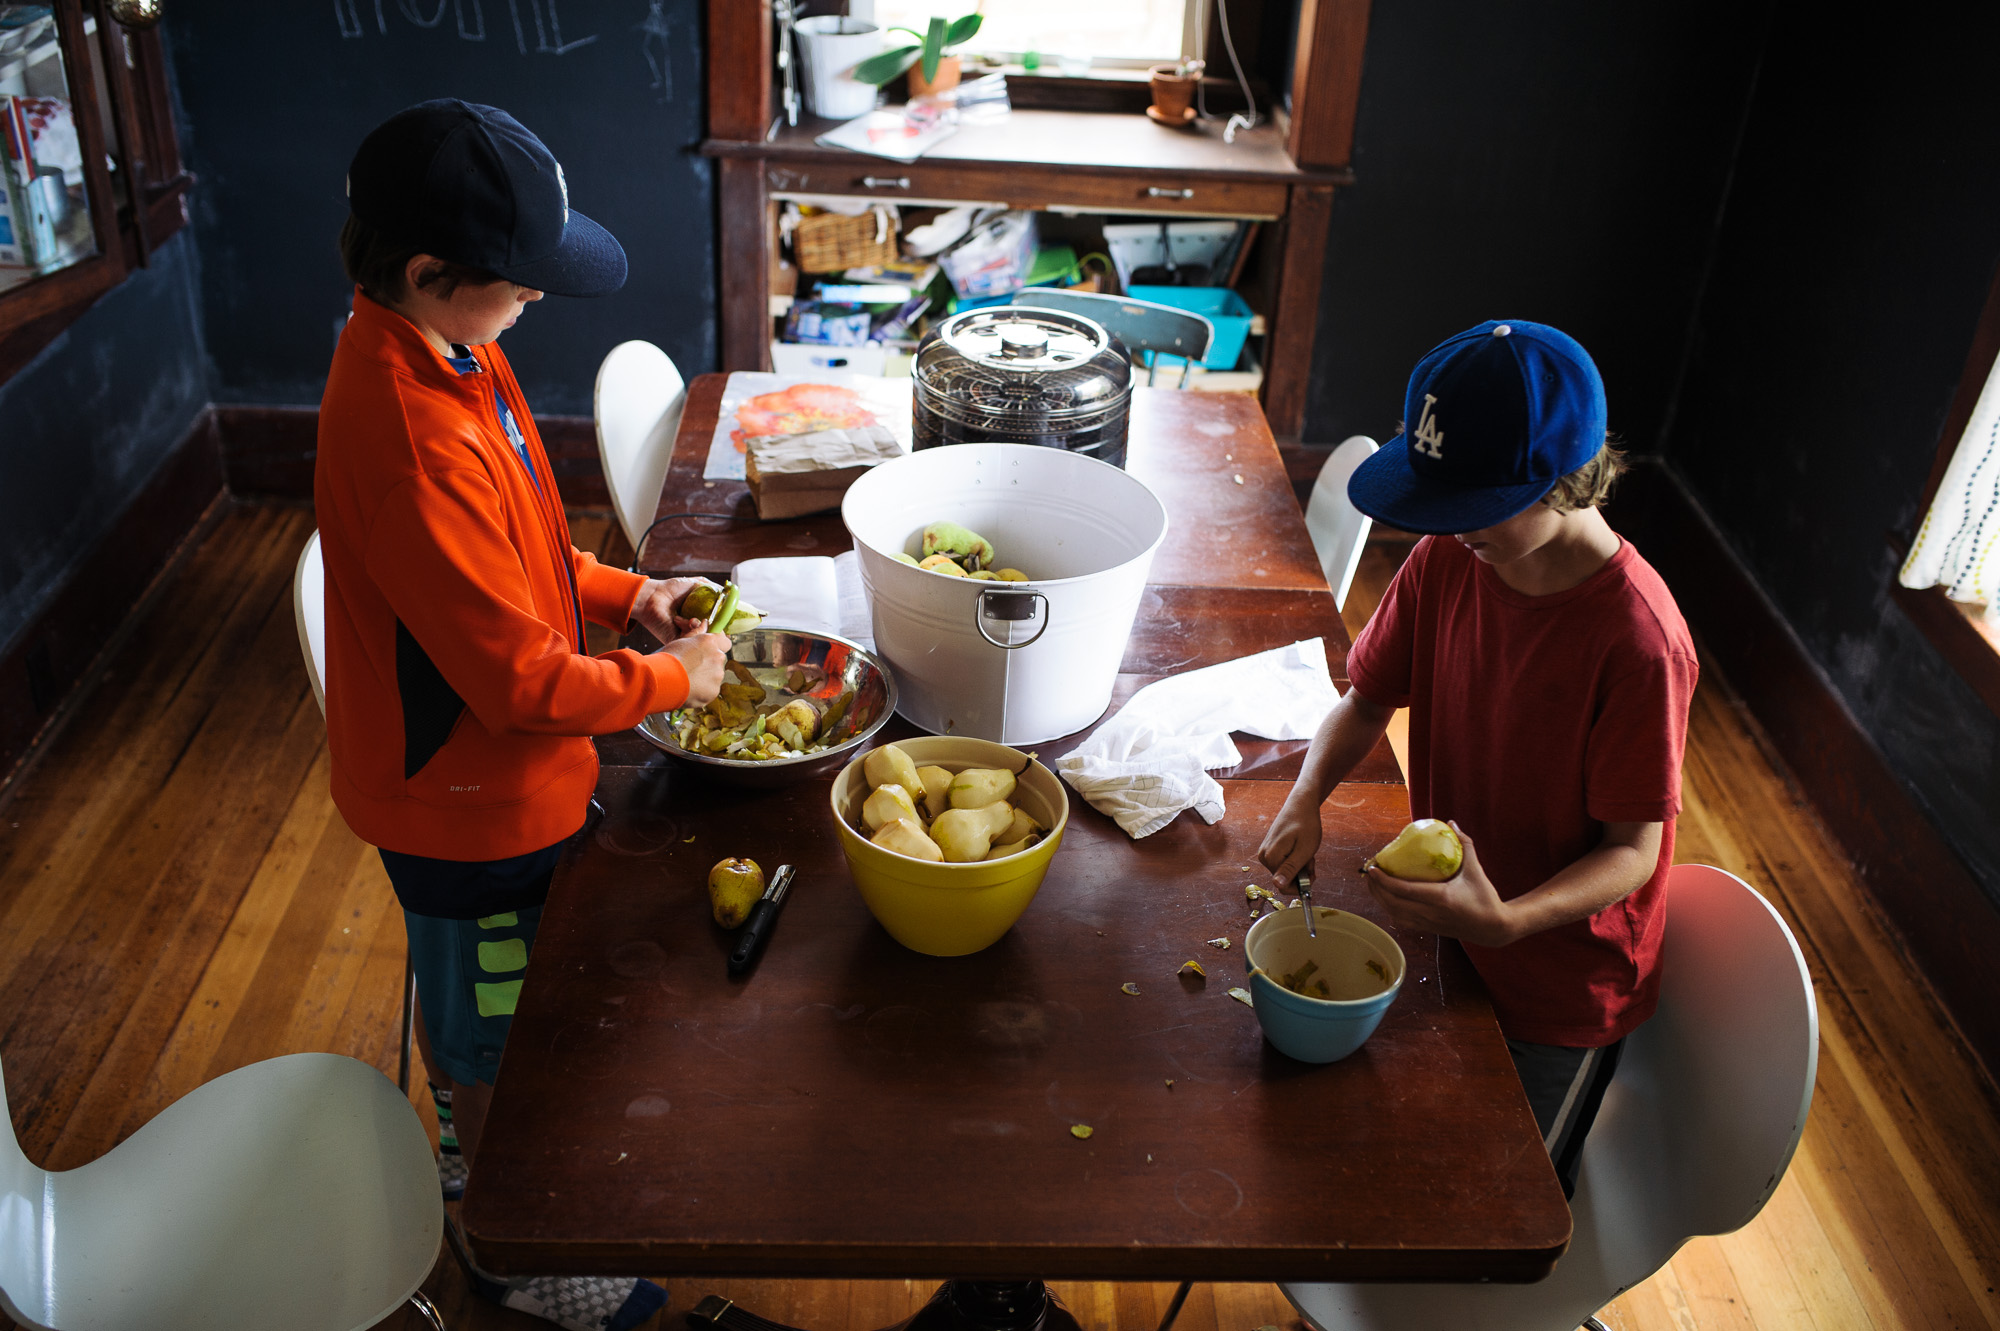 kids peel pears at dinner table - Family documentary photography